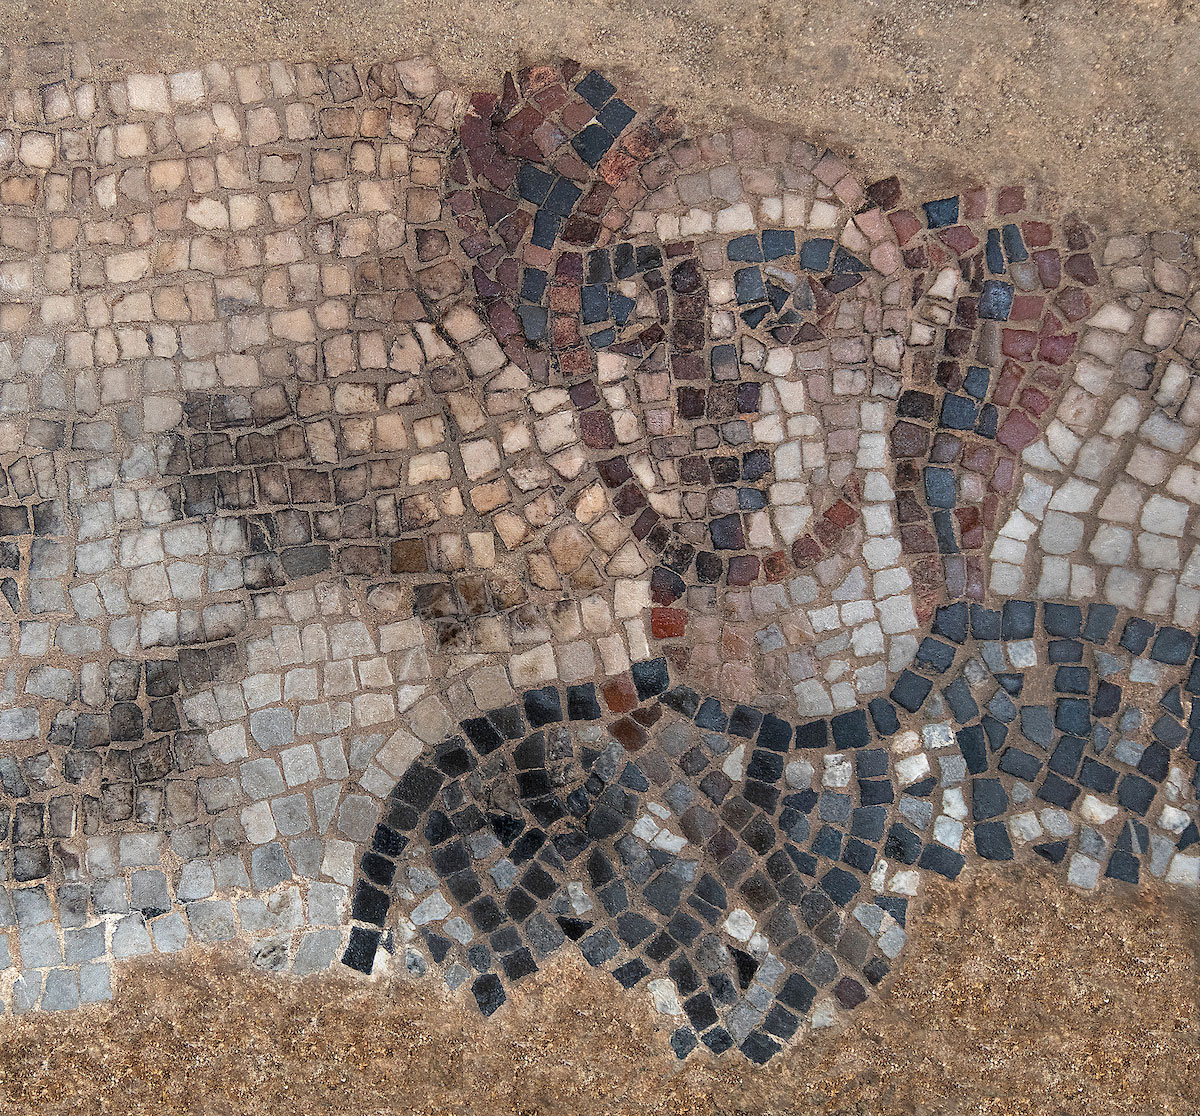 The Israelite commander Barak depicted in the Huqoq synagogue mosaic. Photo by Jim Haberman